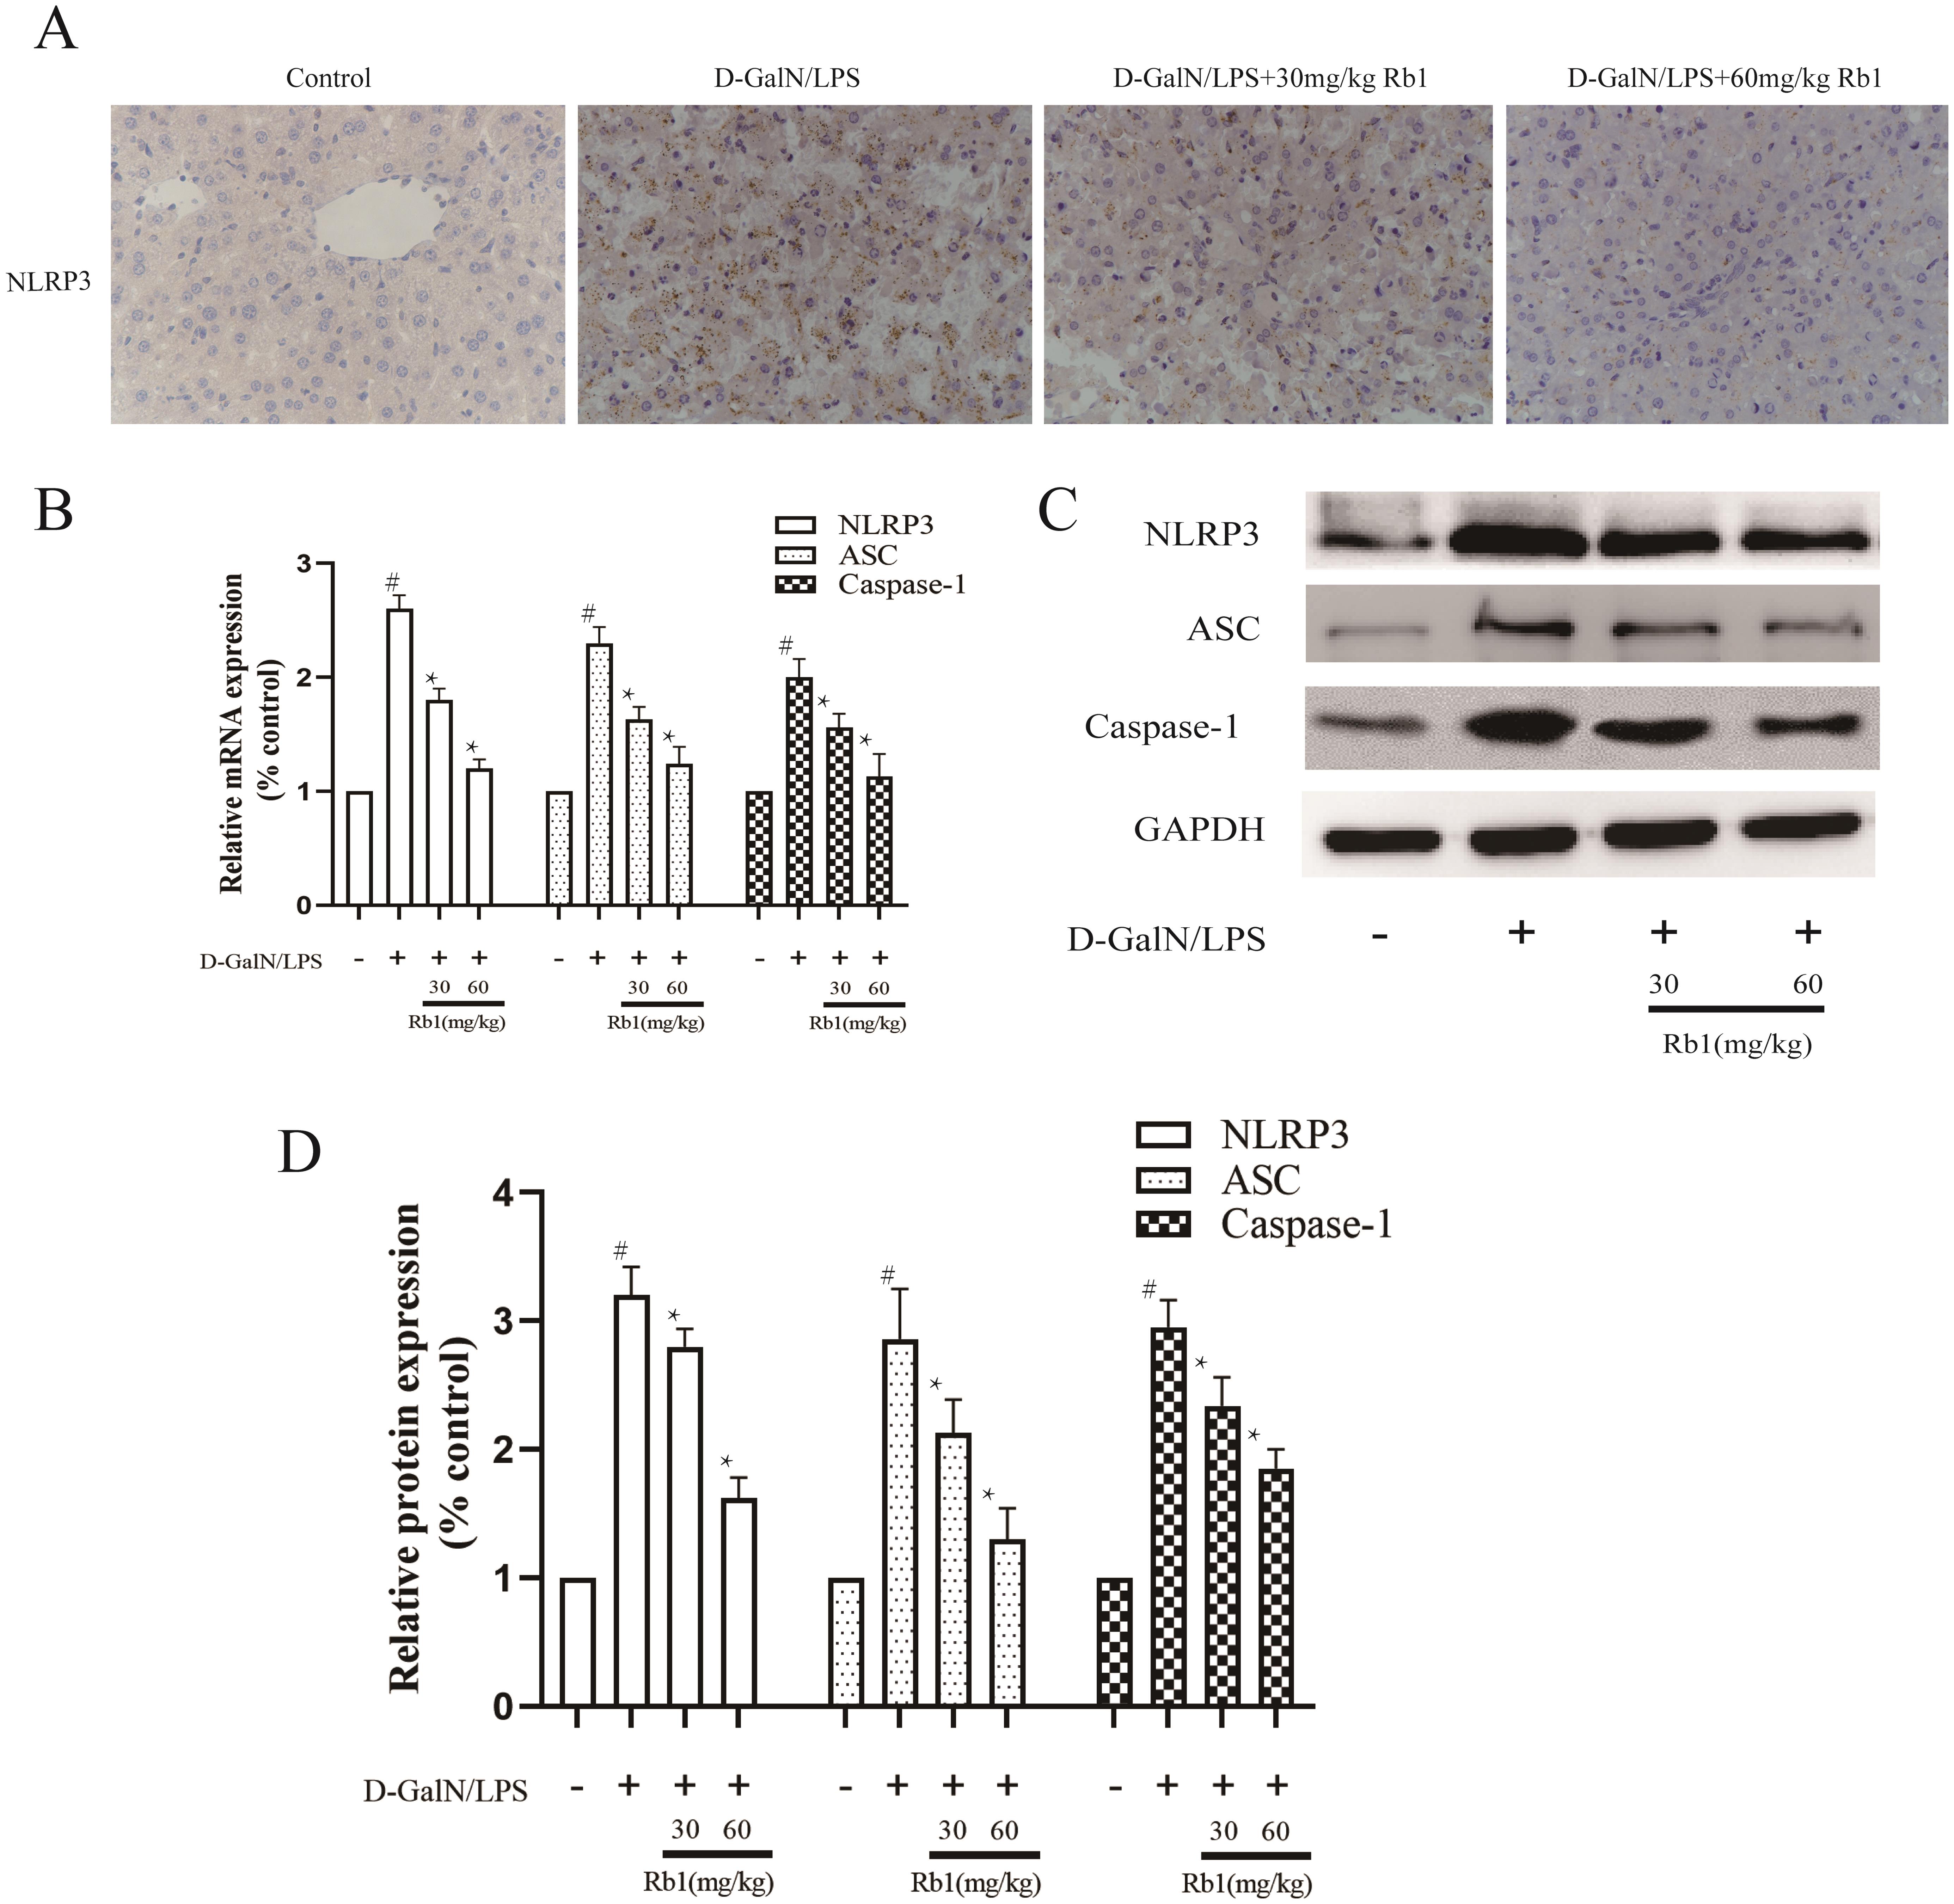 Effect of Rb1 on the activation of NLRP3 inflammasome in D-GalN/LPS-induced ALI mice.